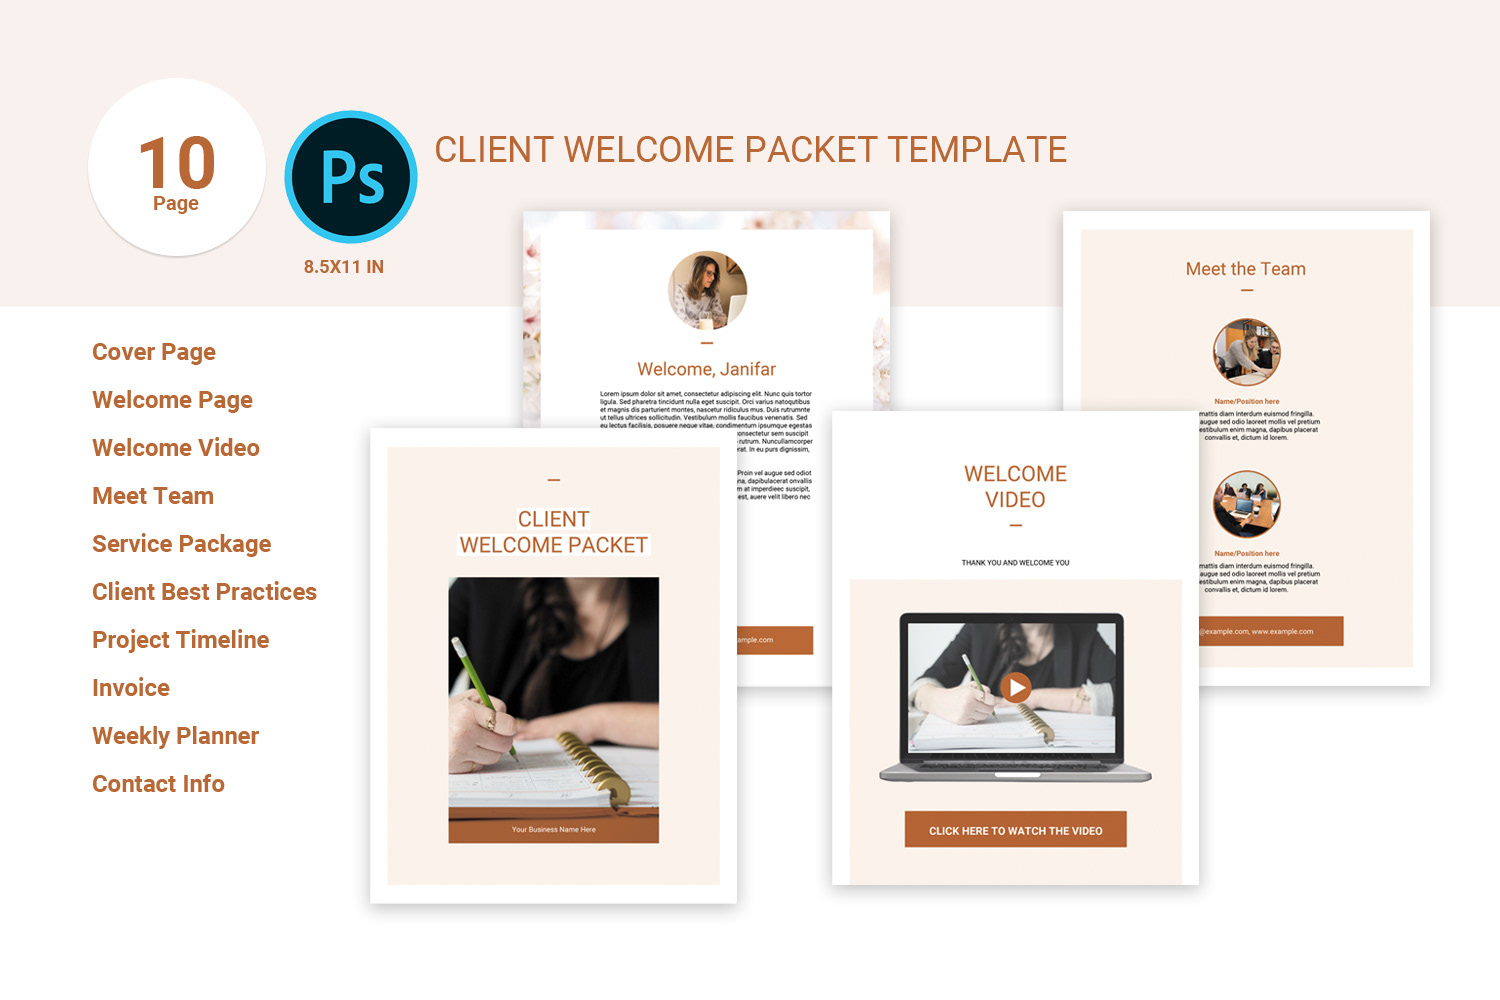 Our clients Template. Packet client